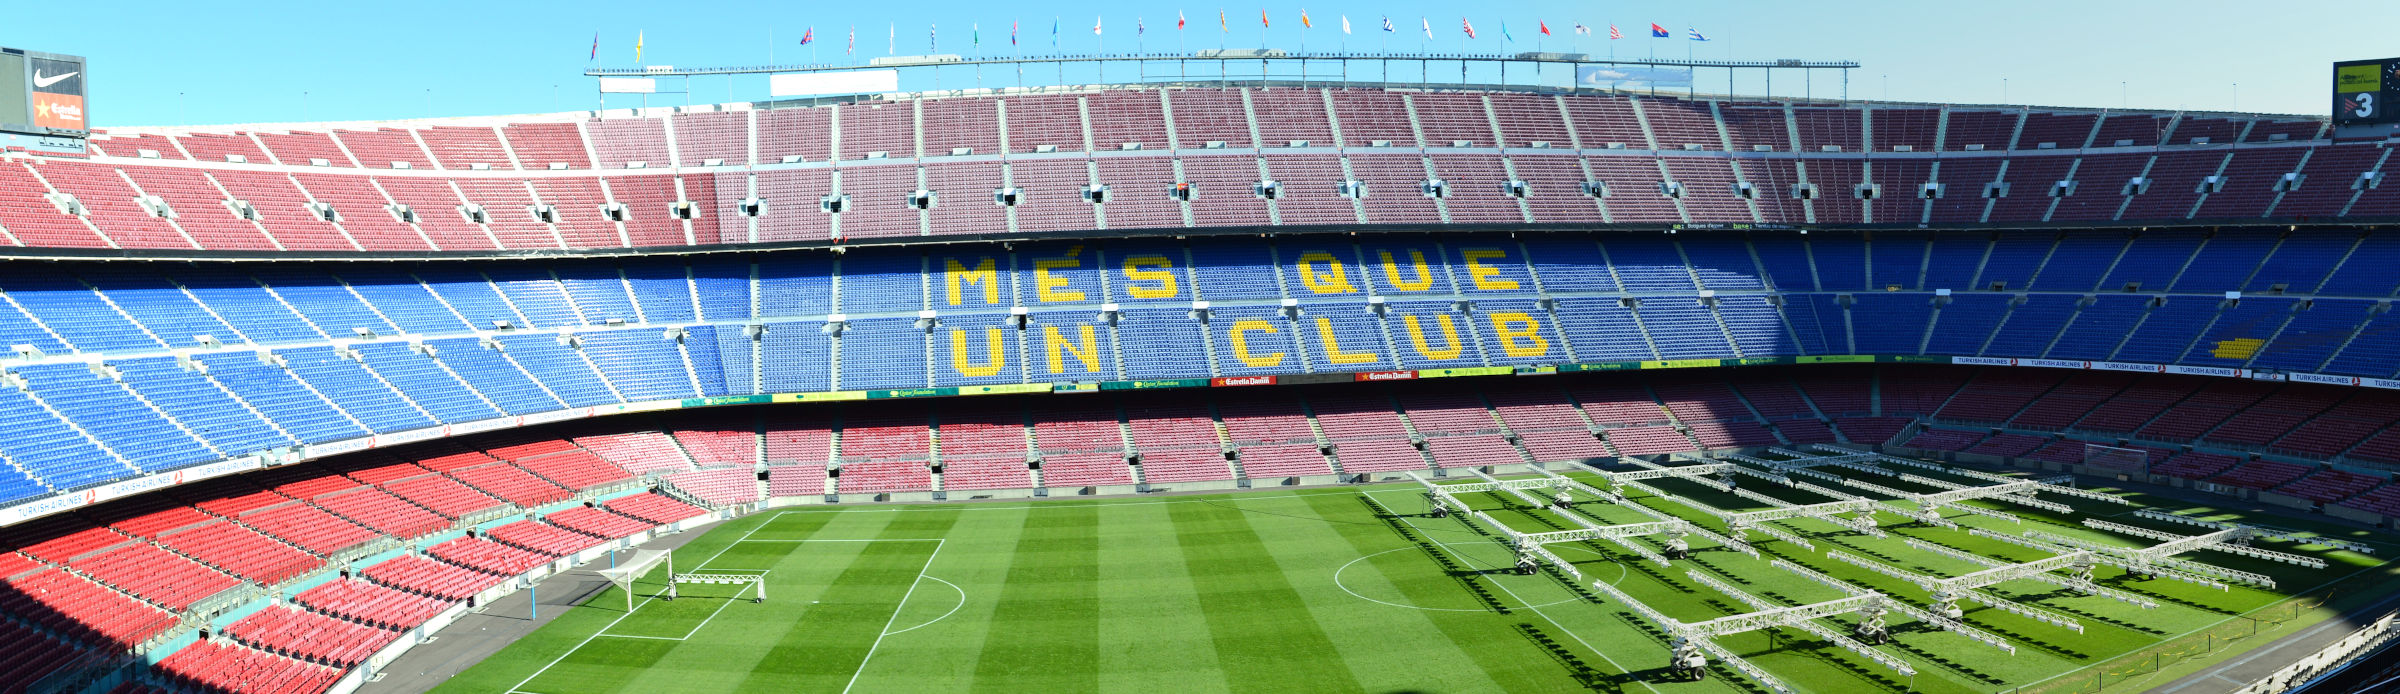 Mowing 'stripes' on the pitch at Camp Nou in Barcelona